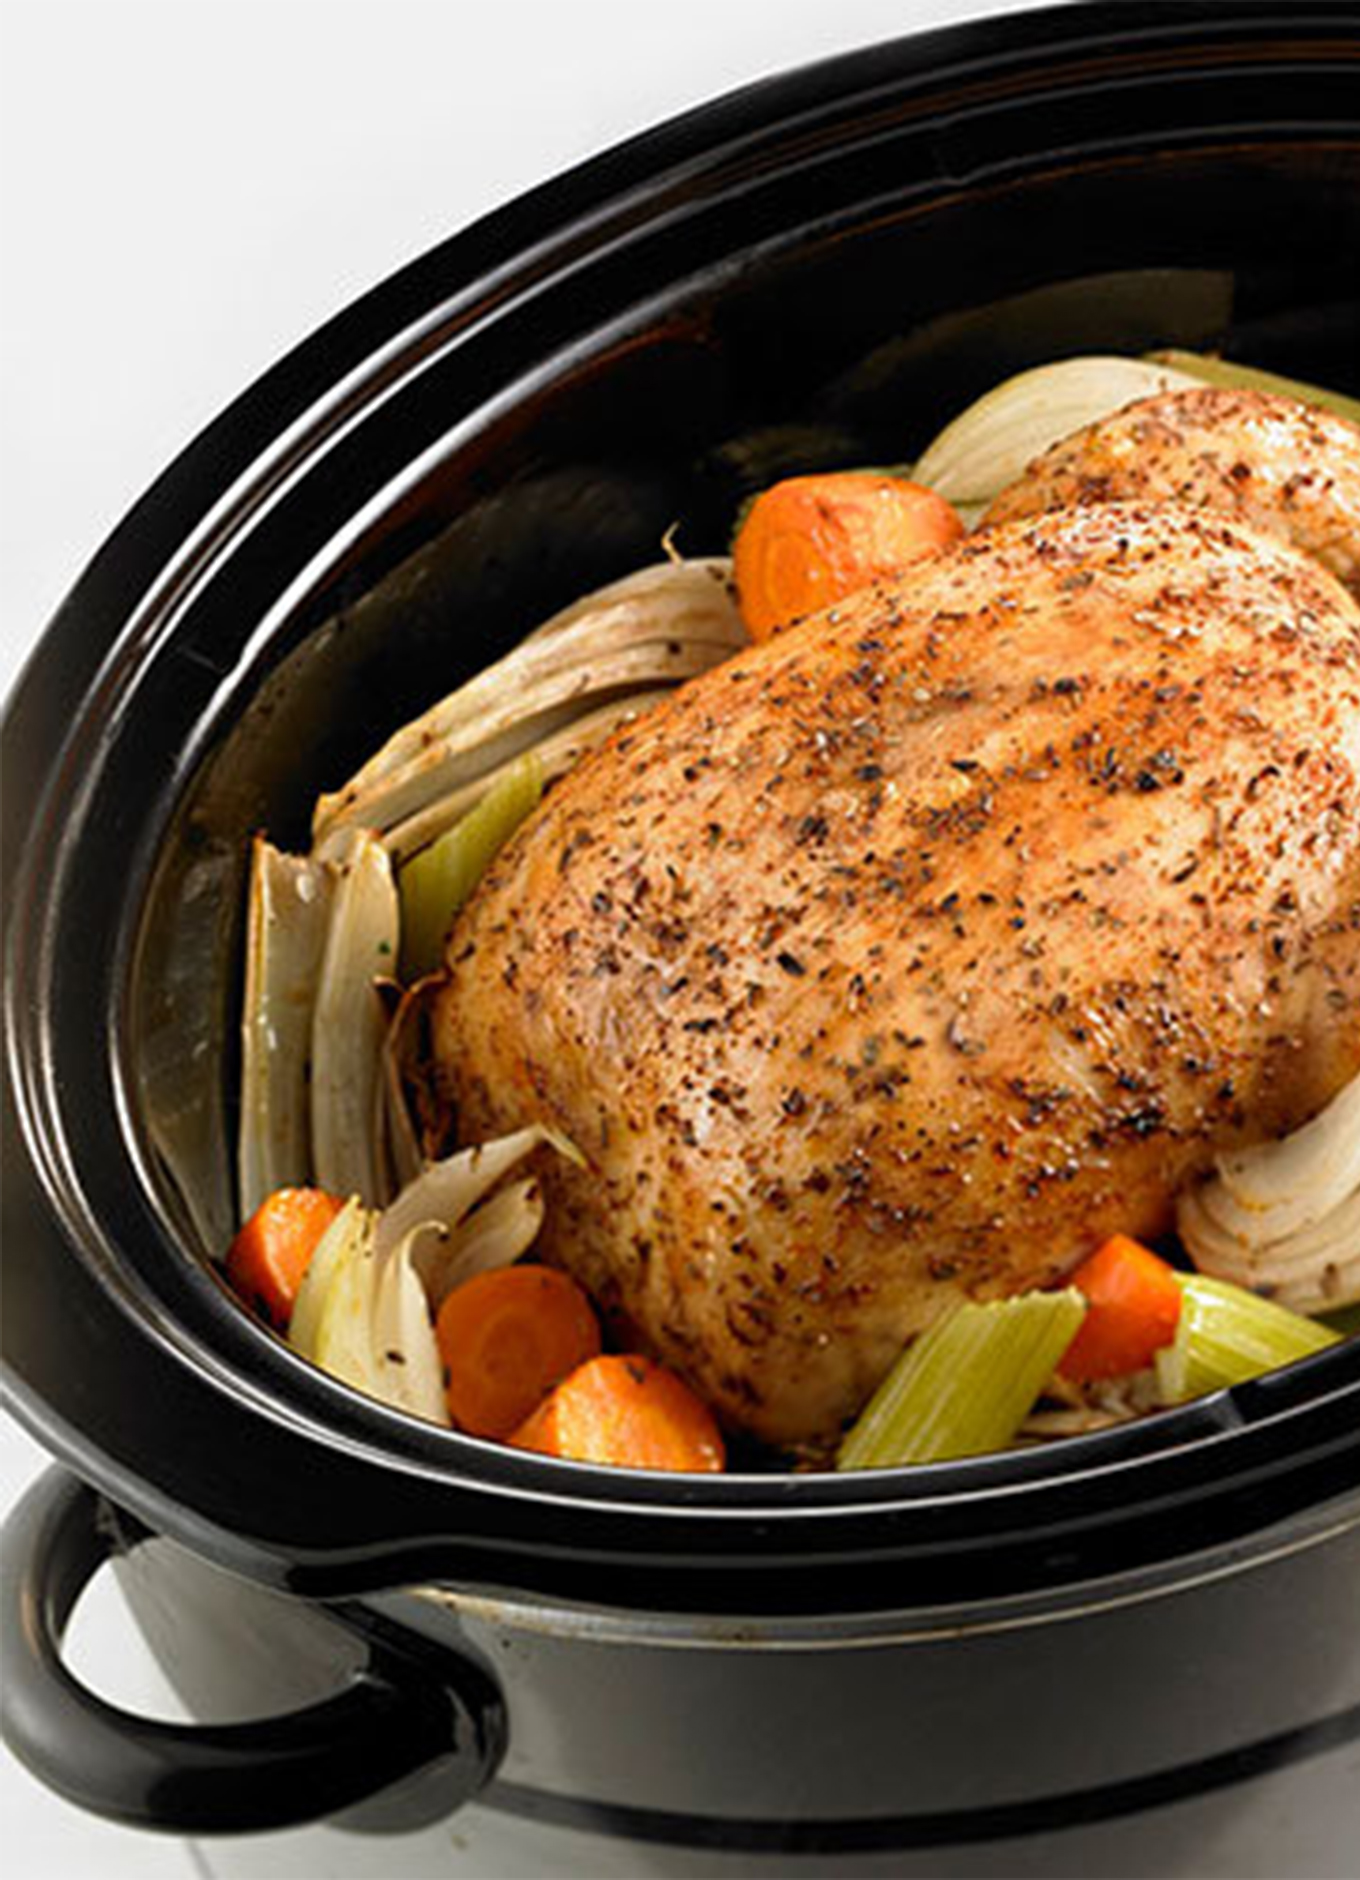 A whole cooked chicken resting in a slow cooker on a bed of celery, carrots, and onion.